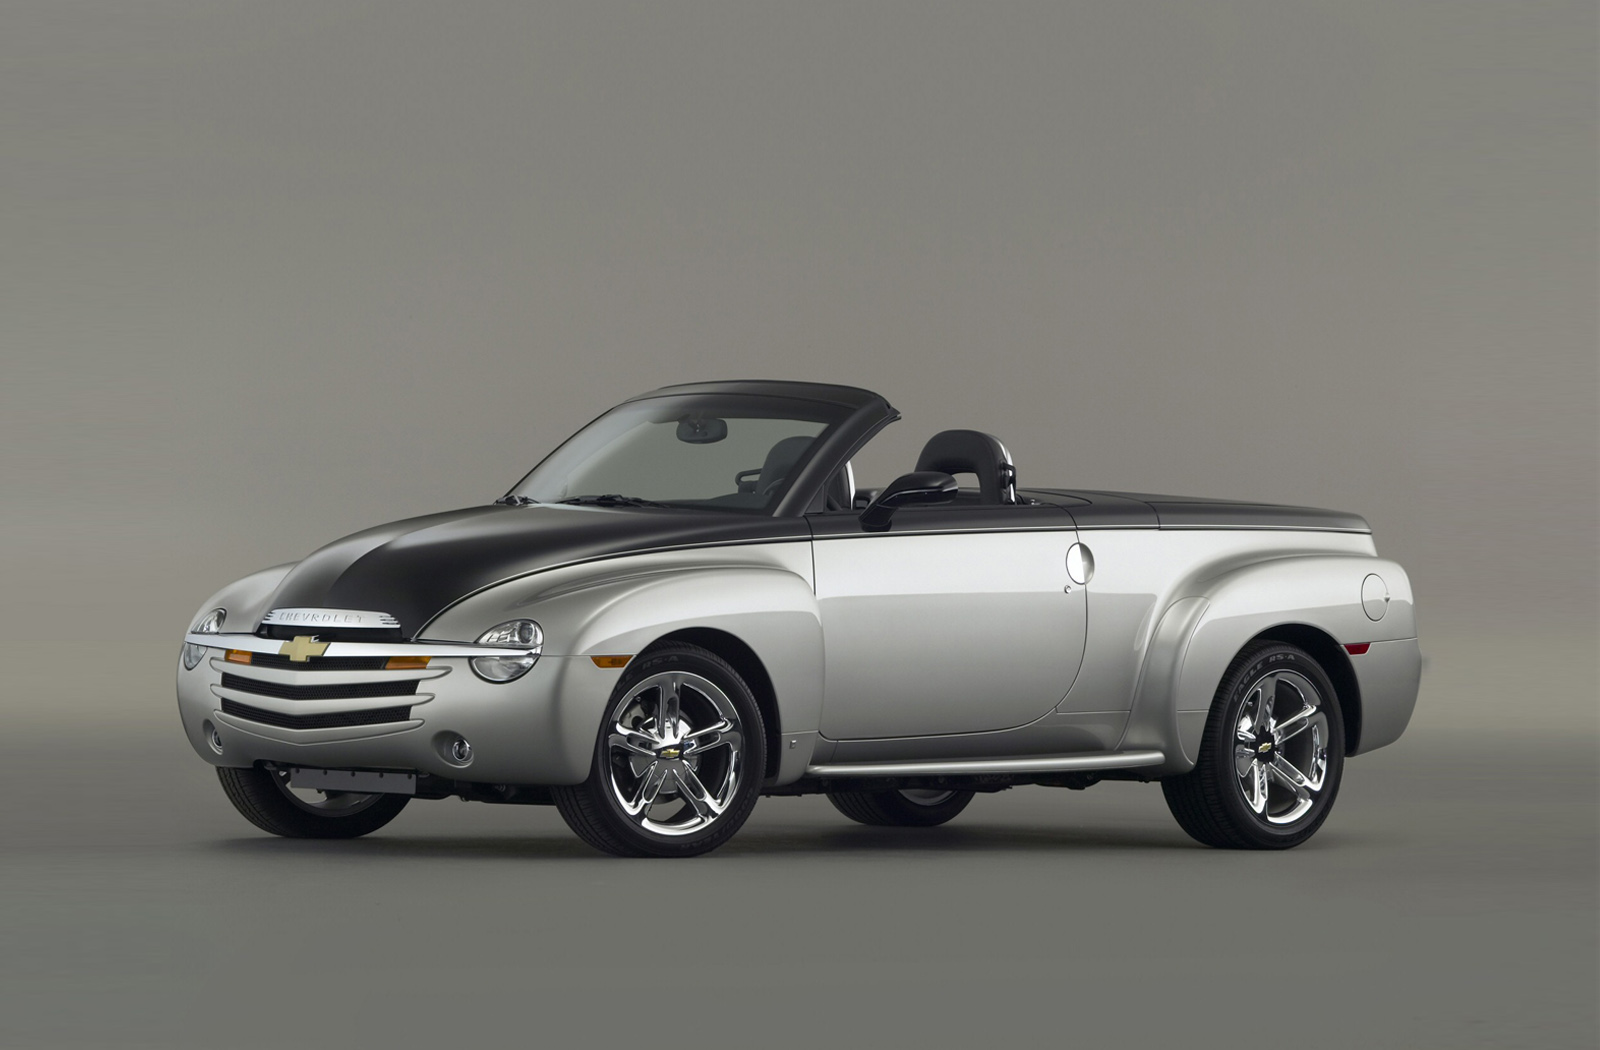 hate-it-or-love-it-the-chevy-ssr-is-one-of-the-coolest-pickup-trucks-of-all-time-170565_1.jpg